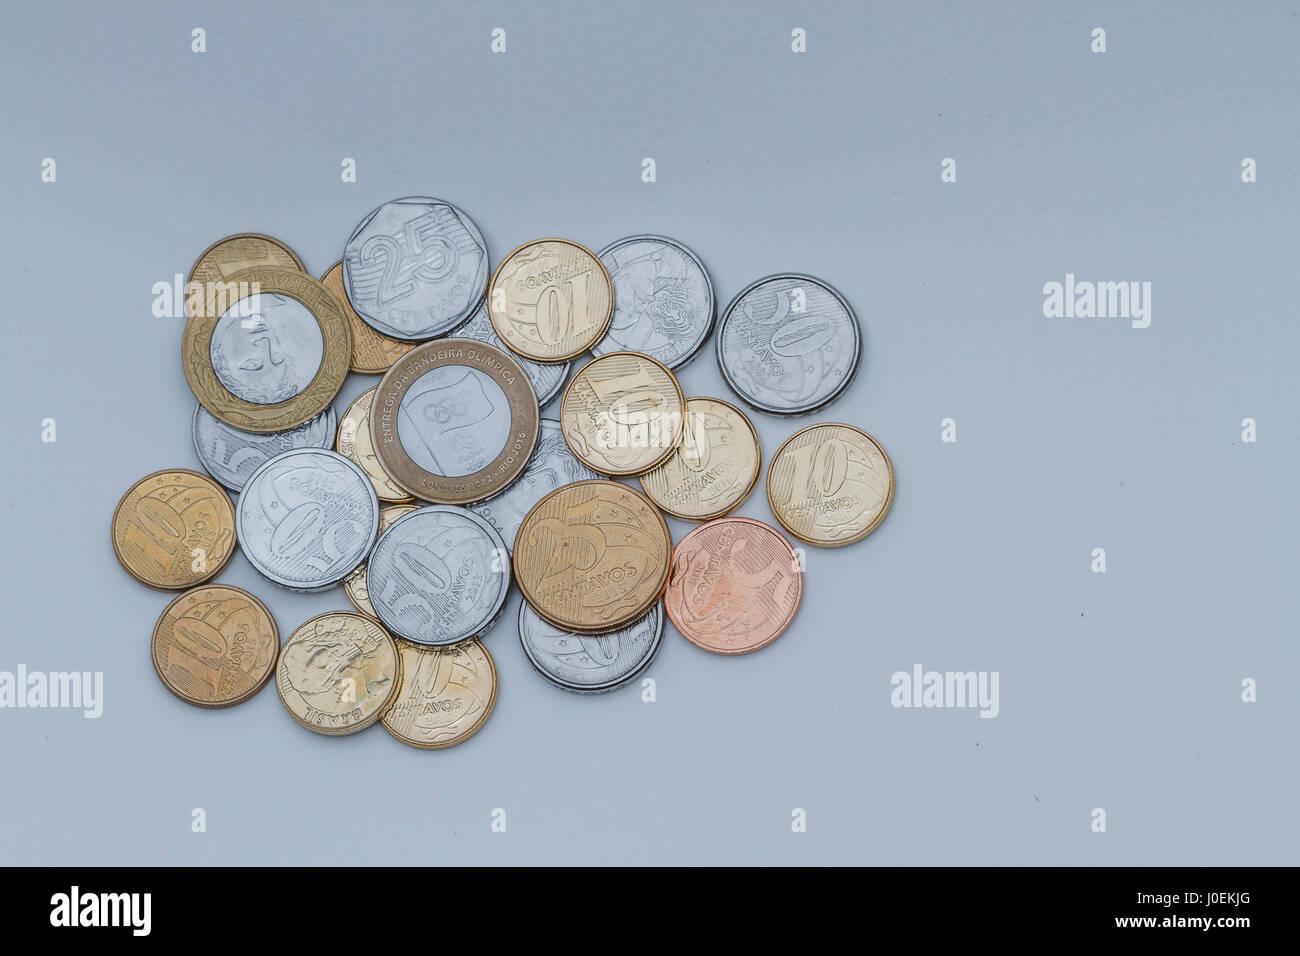 Coins on the table. Economy. Stock Photo